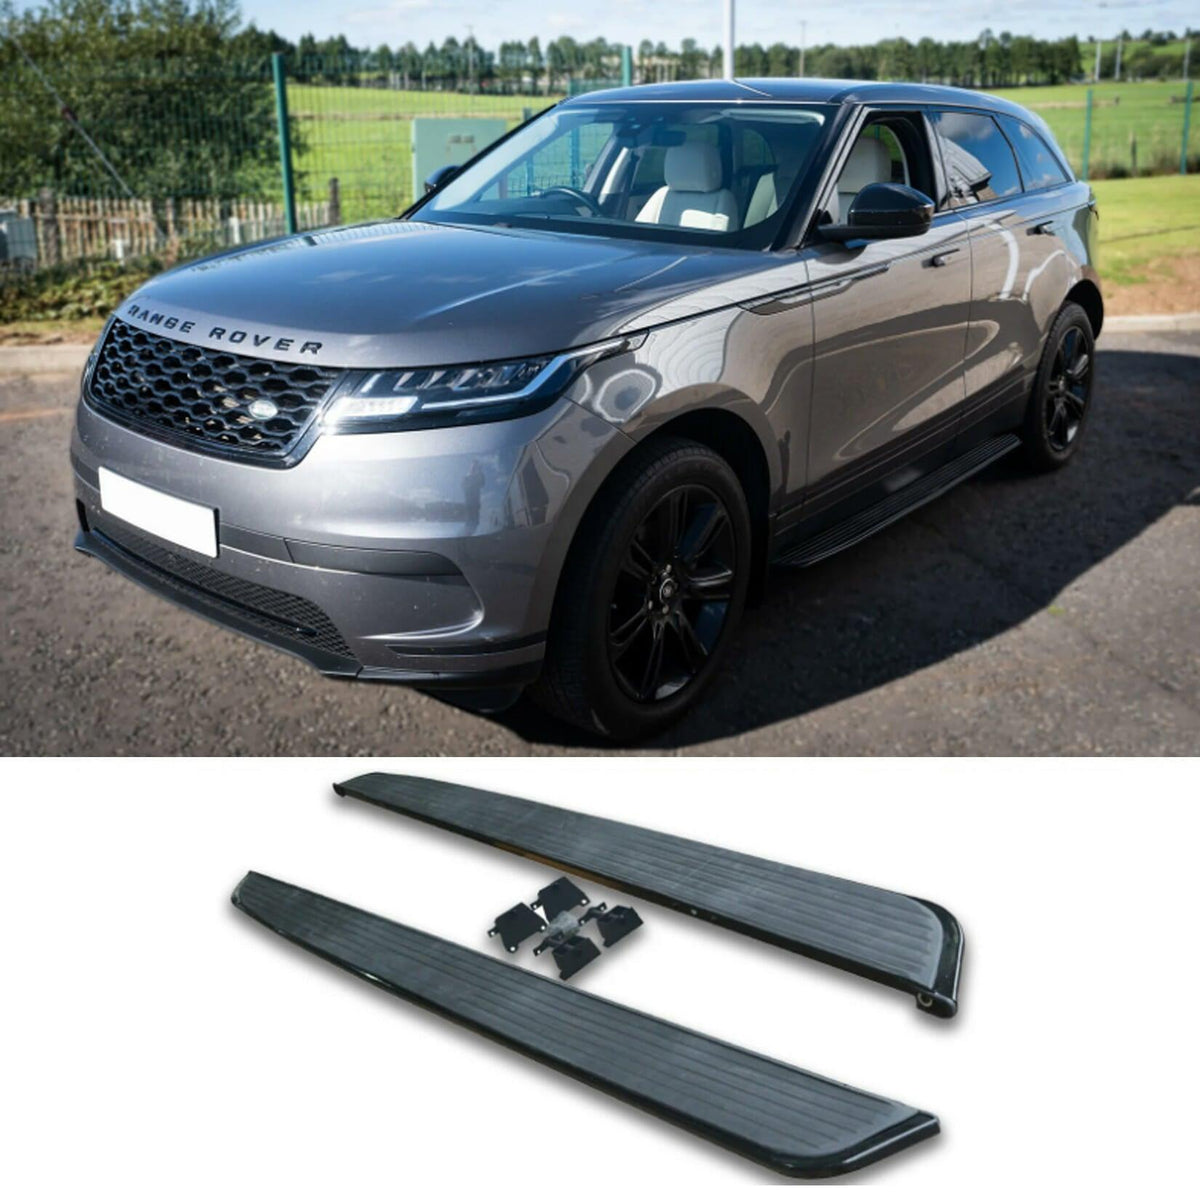 RANGE ROVER VELAR 2017 ON OE STYLE RUNNING BOARDS - SIDE STEPS - IN BLACK - PAIR - Storm Xccessories2